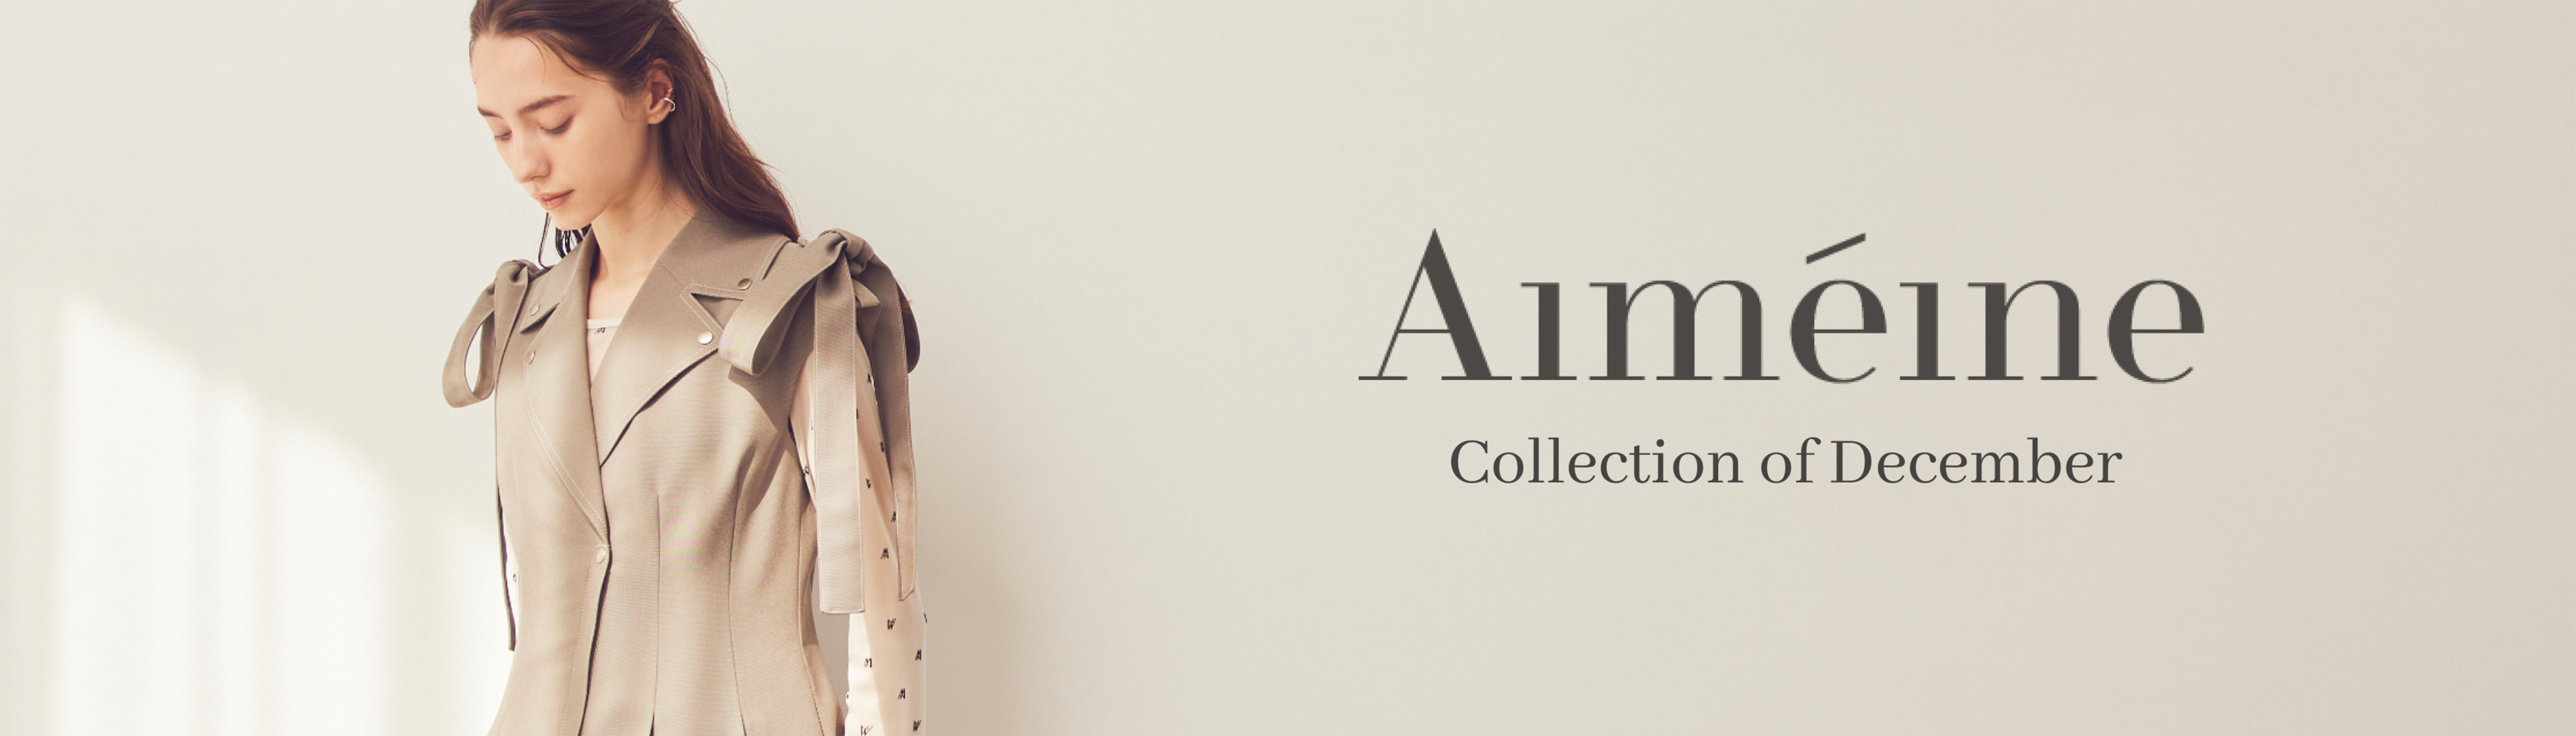 Aimeine Collection of August